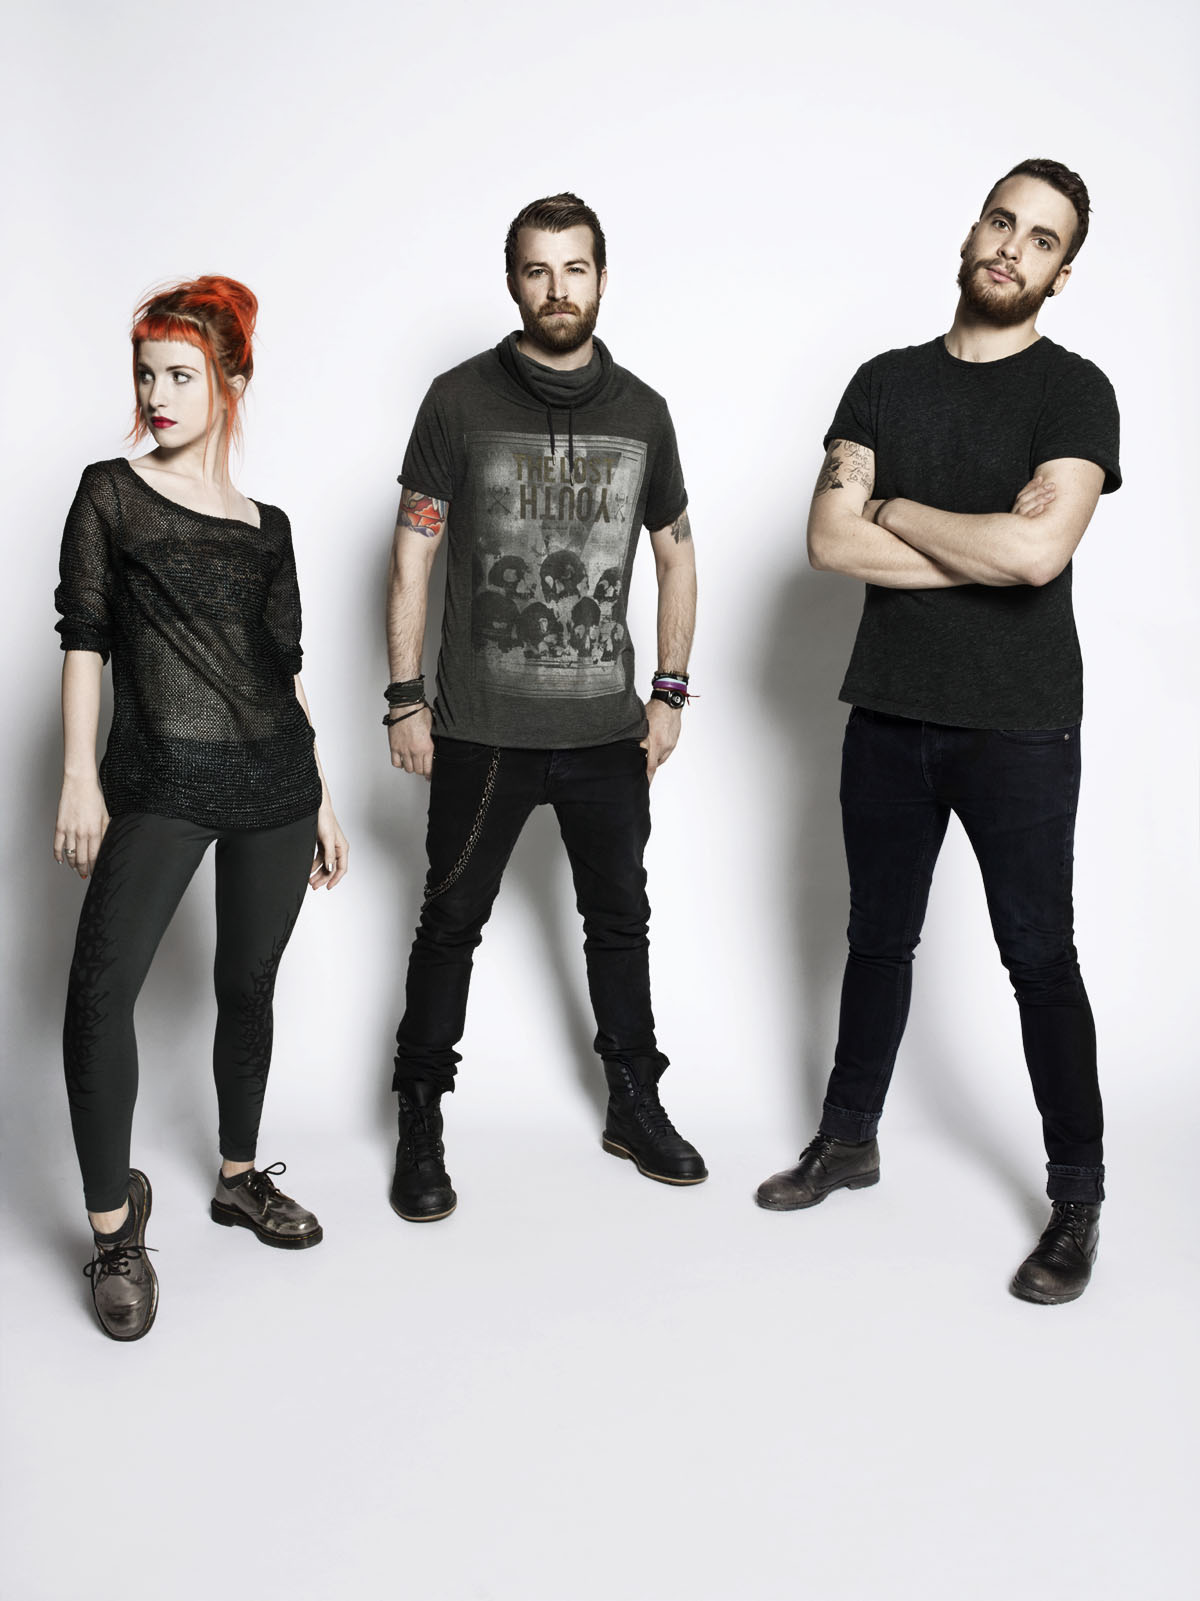 http://www.coupdemainmagazine.com/sites/default/files/legacy/4/paramore-2.jpg